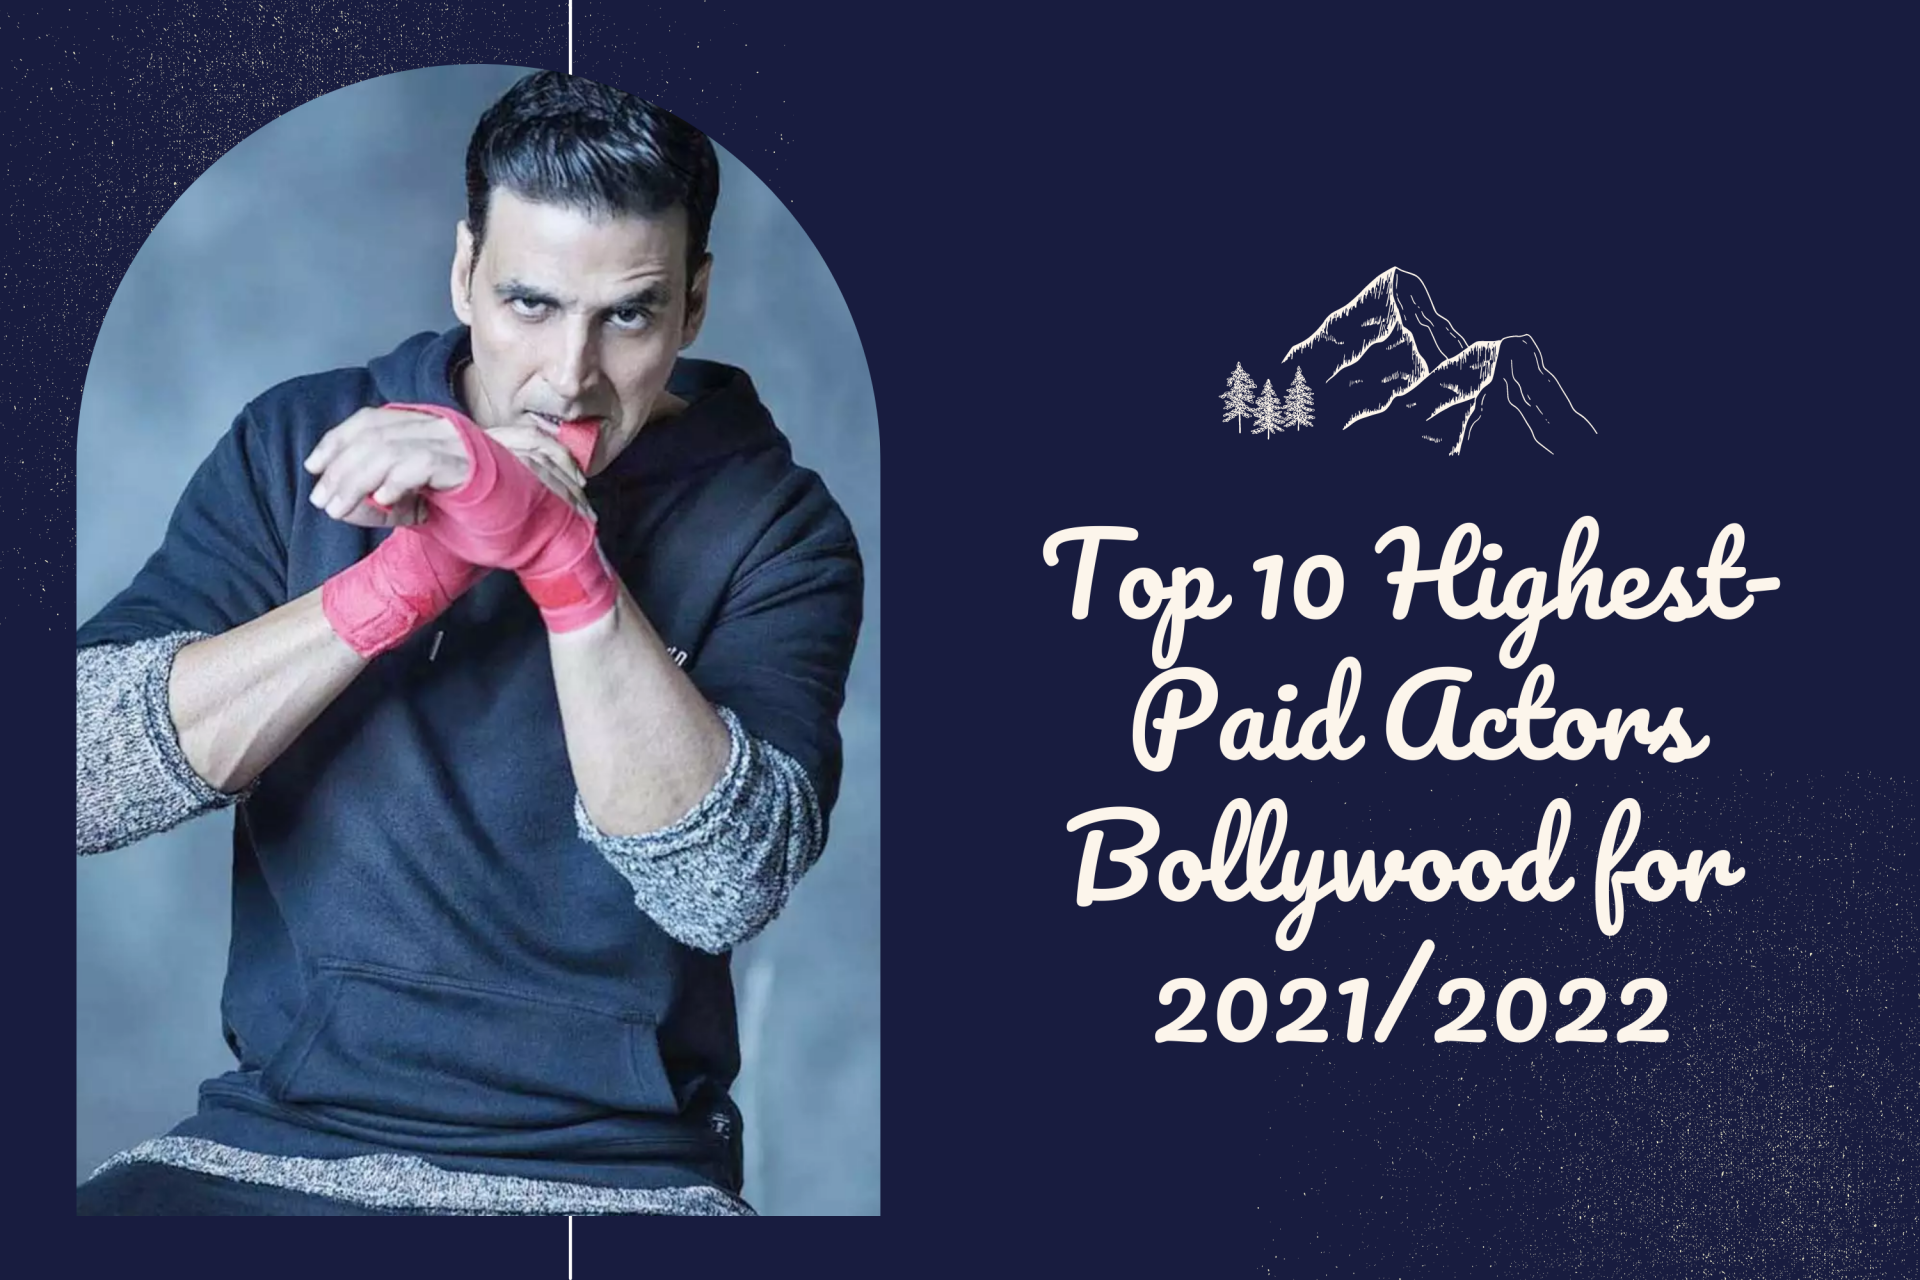 Top 10 Highest-Paid Actors in Bollywood for 2021/2022